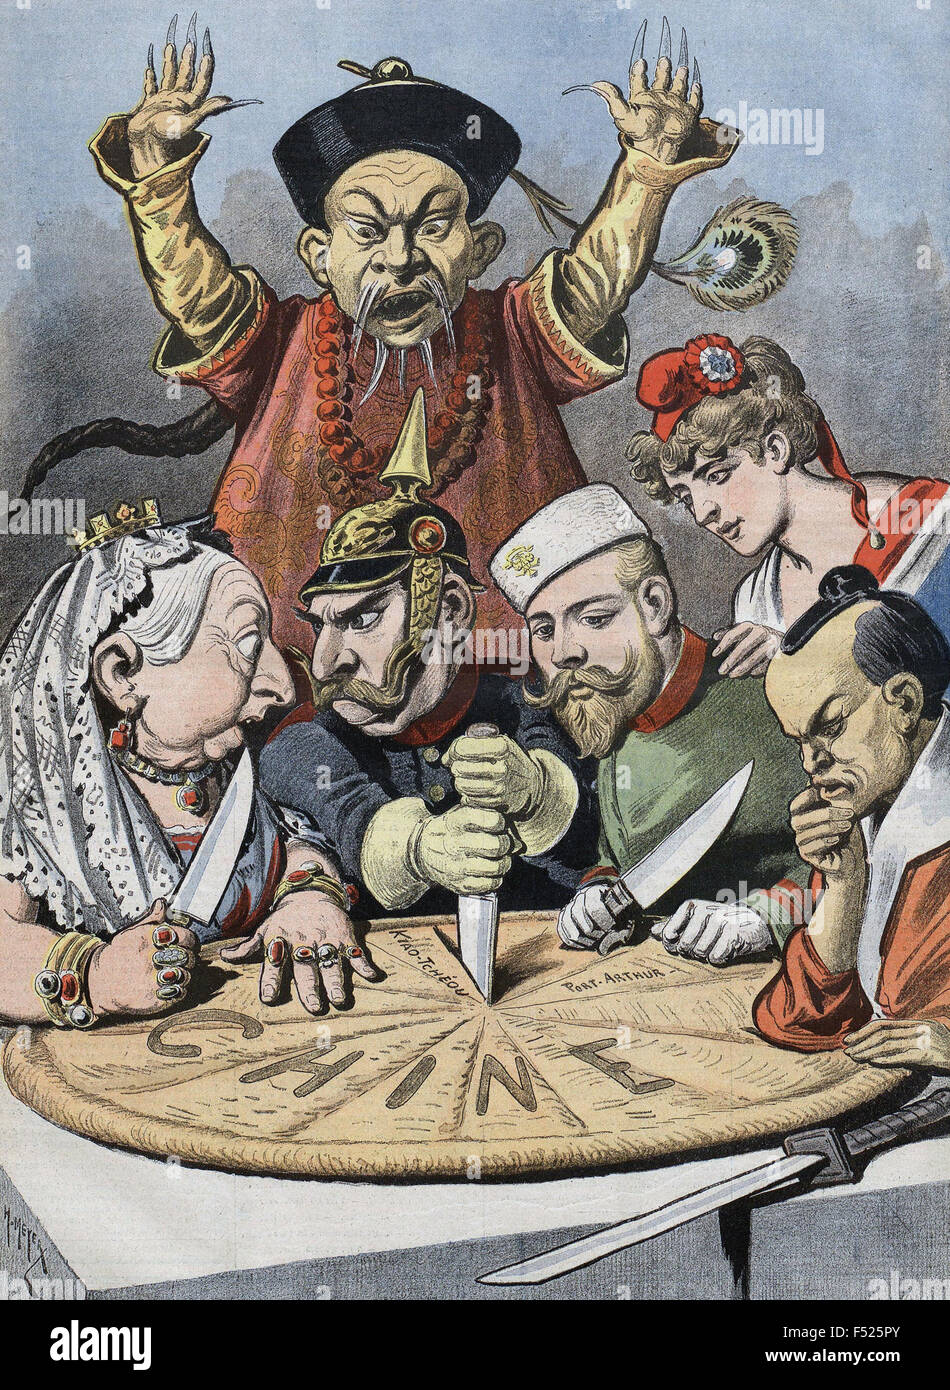 BOXER REBELLION 'China - the cake of Kings and Emperors' from Le Petit Journal 16 January 1898. From left Queen Victoria, Wilhelm II of Germany, Tsar Nicholas II, a Japanese samurai figure ponders his options while France - symbolised by Marianne - takes no part in the feast of territory and influence. Stock Photo